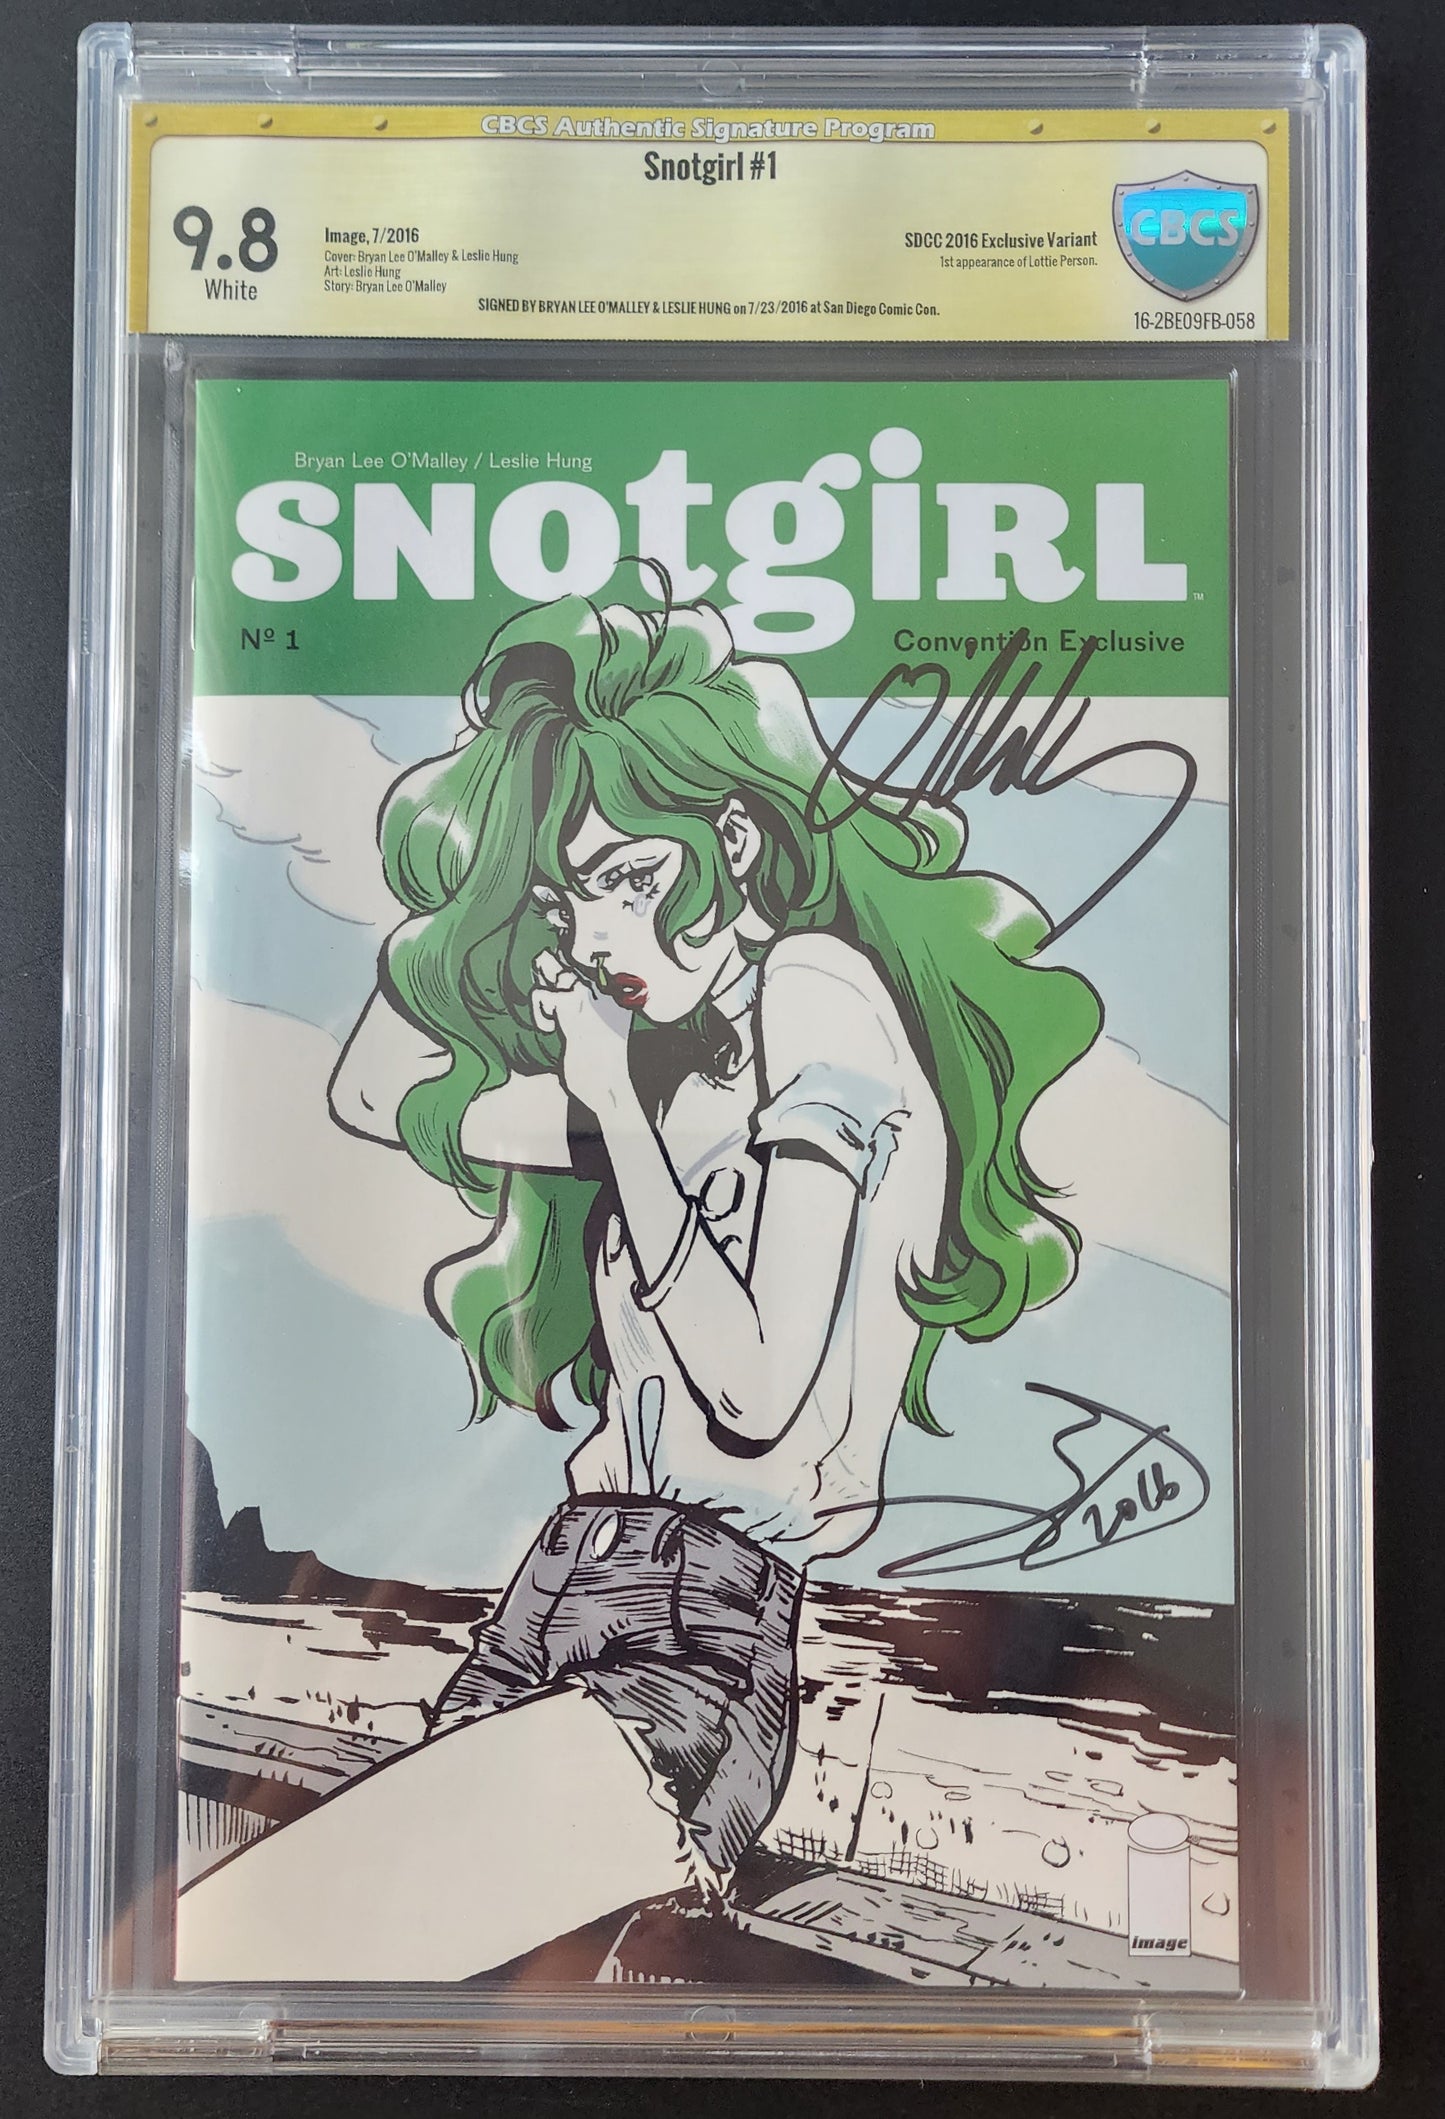 9.8 CBCS SNOTGIRL #1 SDCC CONVENTION EXCLUSIVE 2016 SIGNED BY BRYAN LEE O'MALLEY & LESLIE HUNG